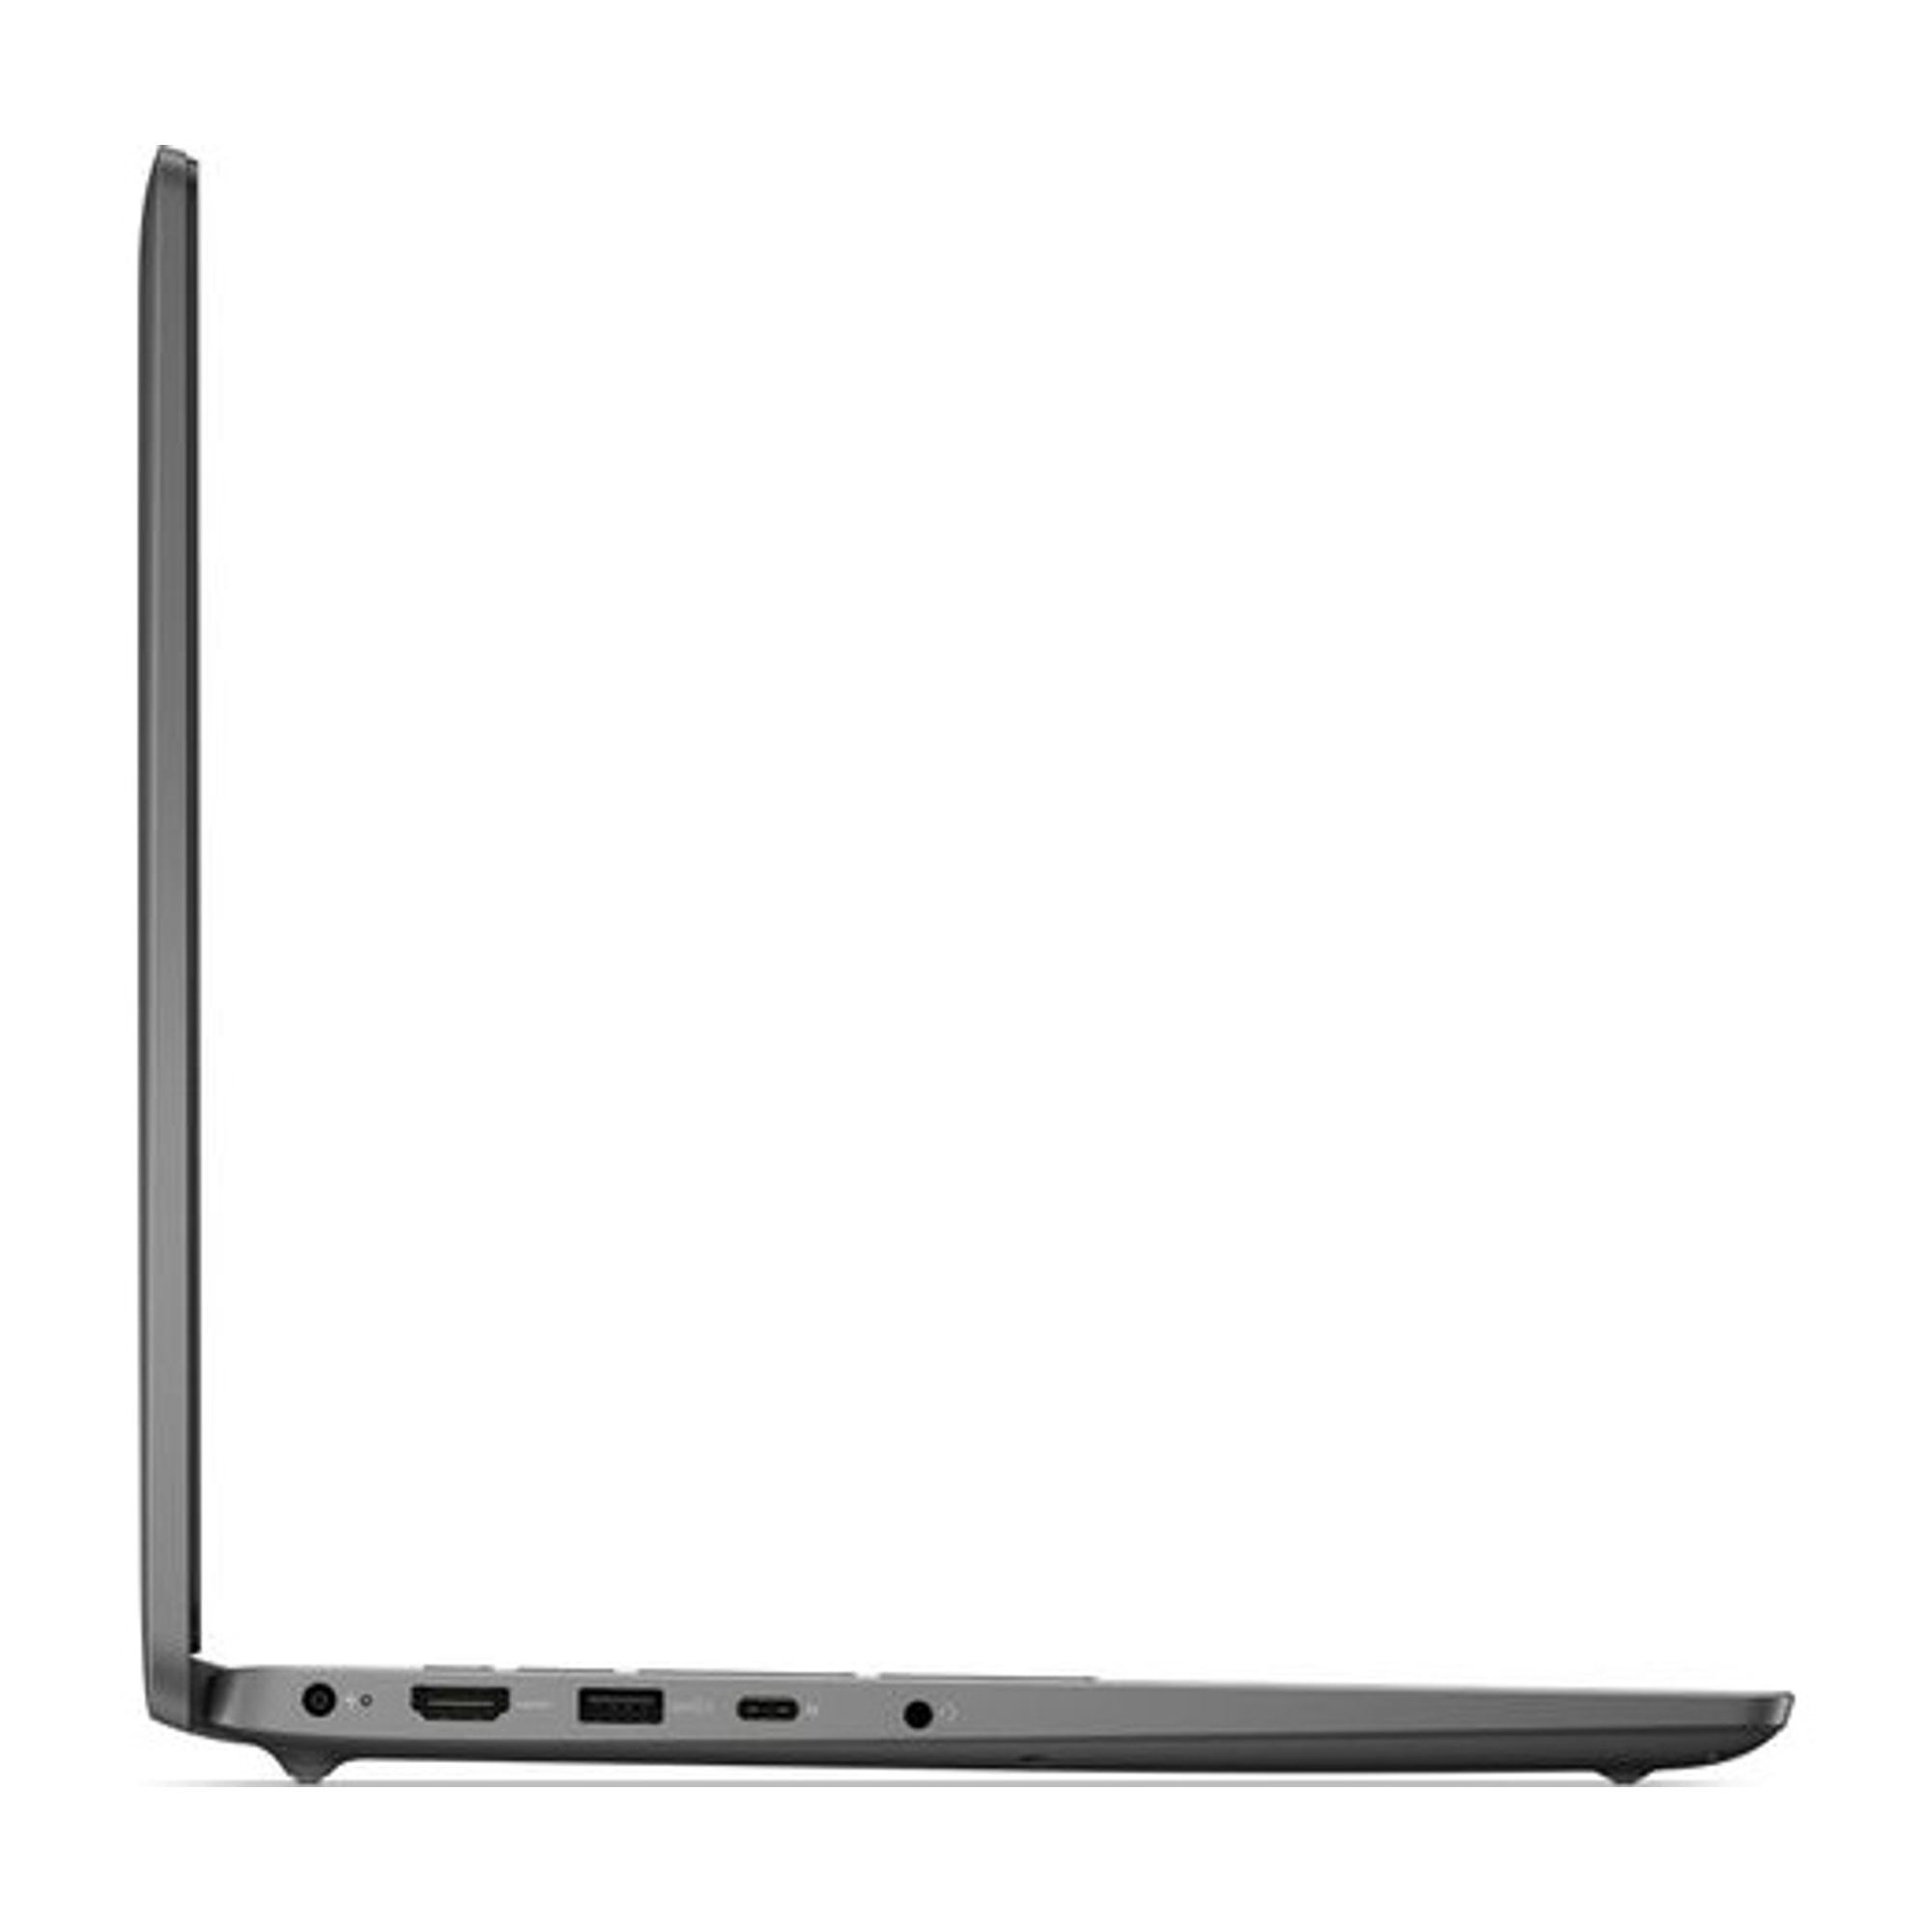 DELL L3540-21 Laptop / Notebook 3